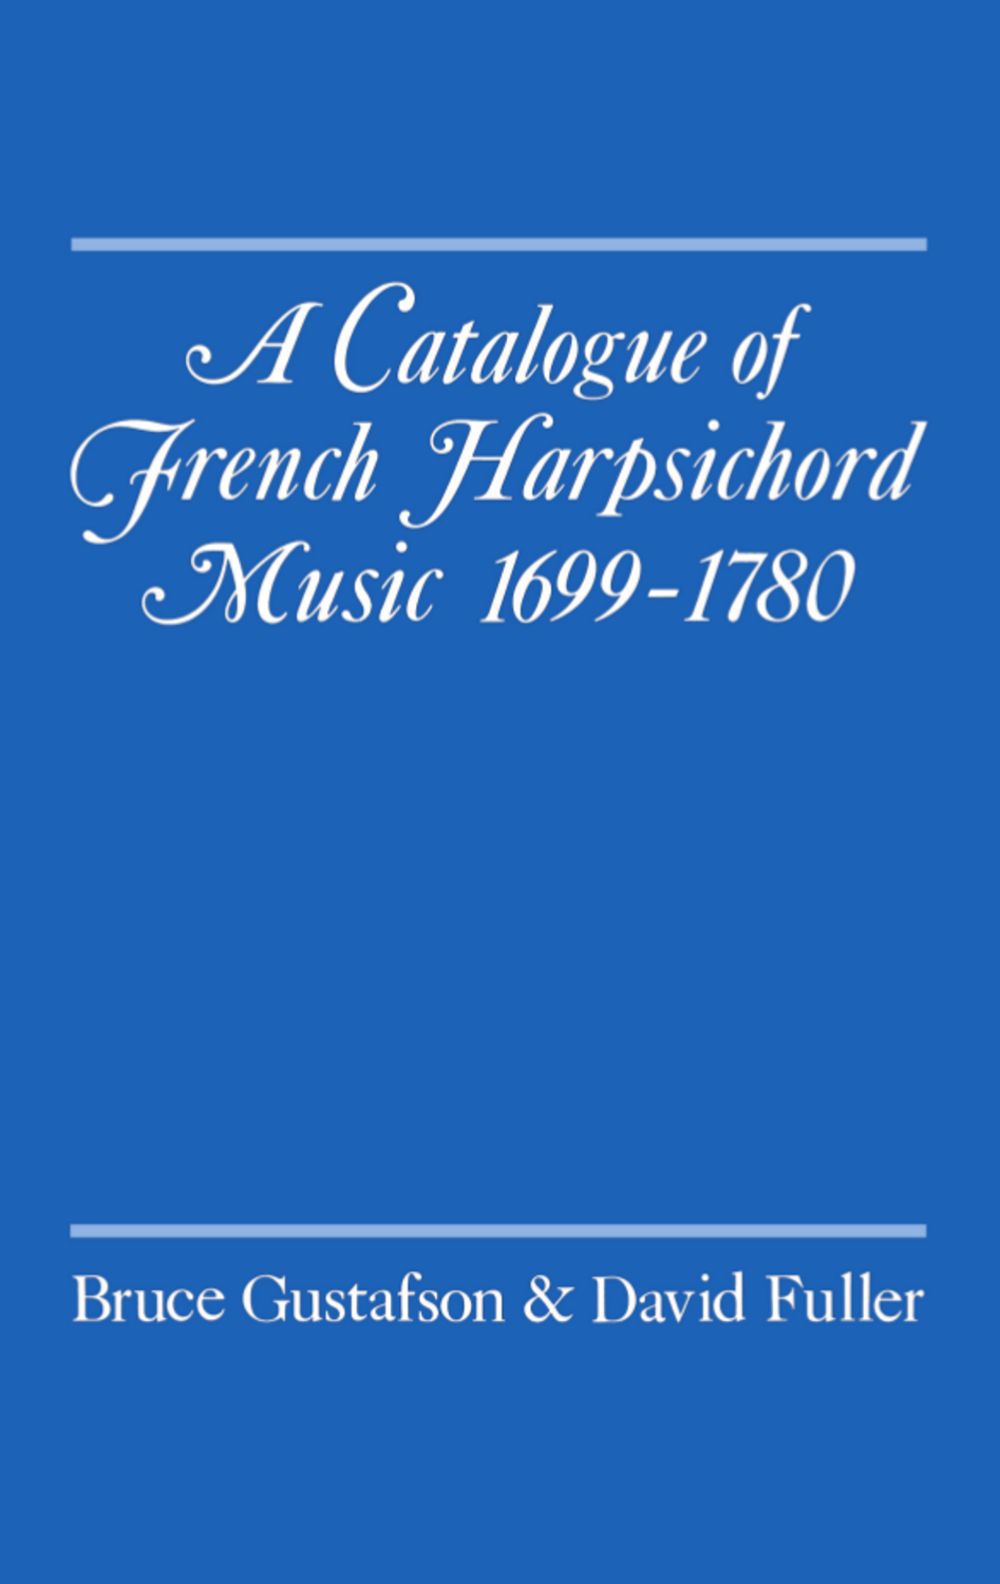 Catalogue Of French Harpsichord Music 1699-1780 Sheet Music Songbook